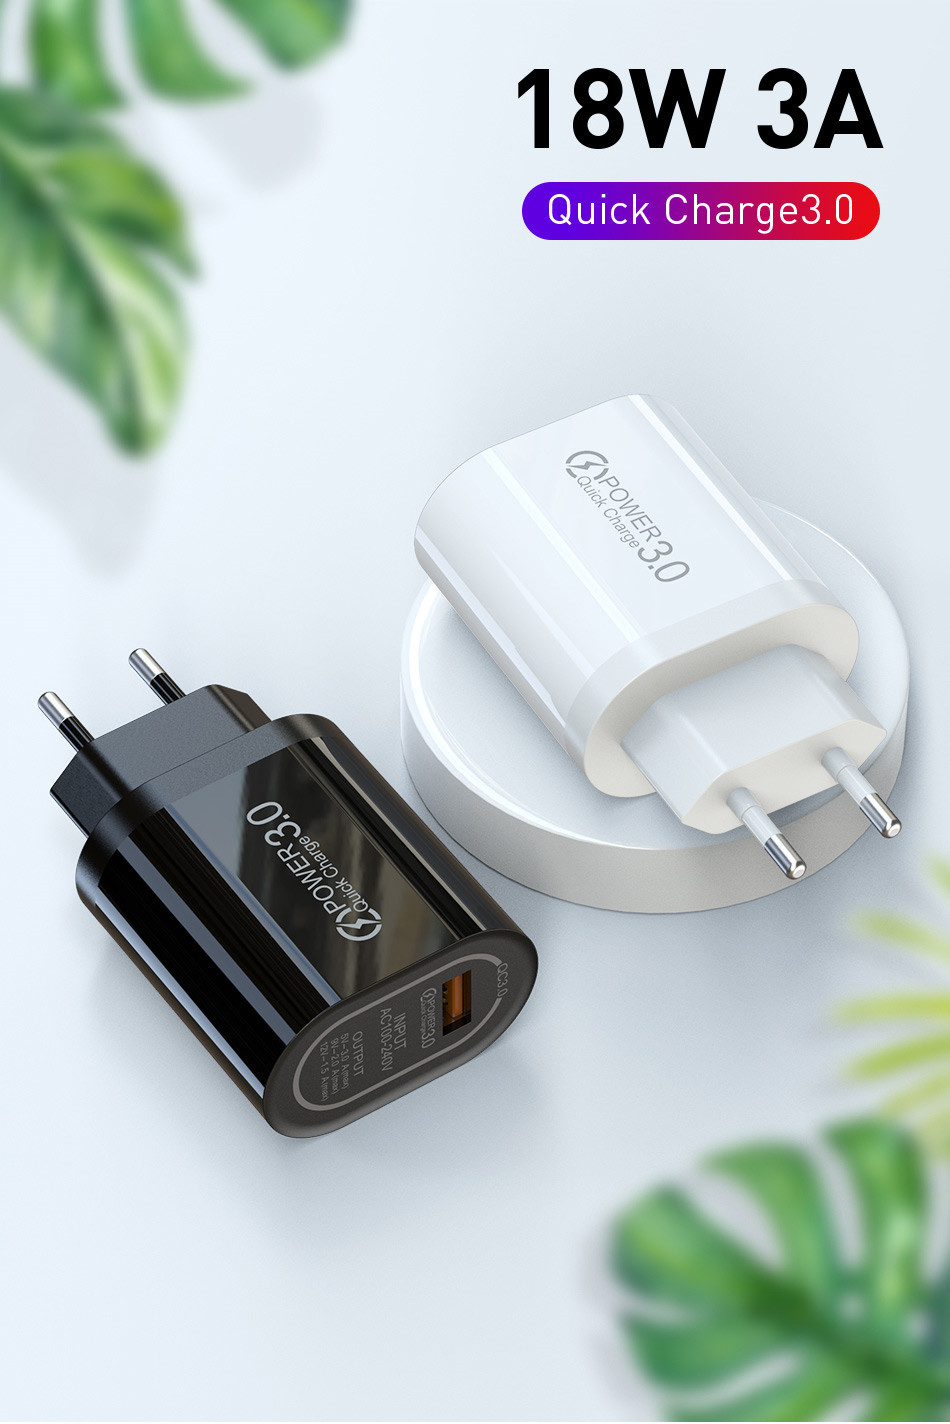 Bakeey-USB-Charger-QC30-Universal-Fast-Charging-USB-Charger-For-iPhone-XS-11-Pro-Mi10-Note-9S-1686568-1